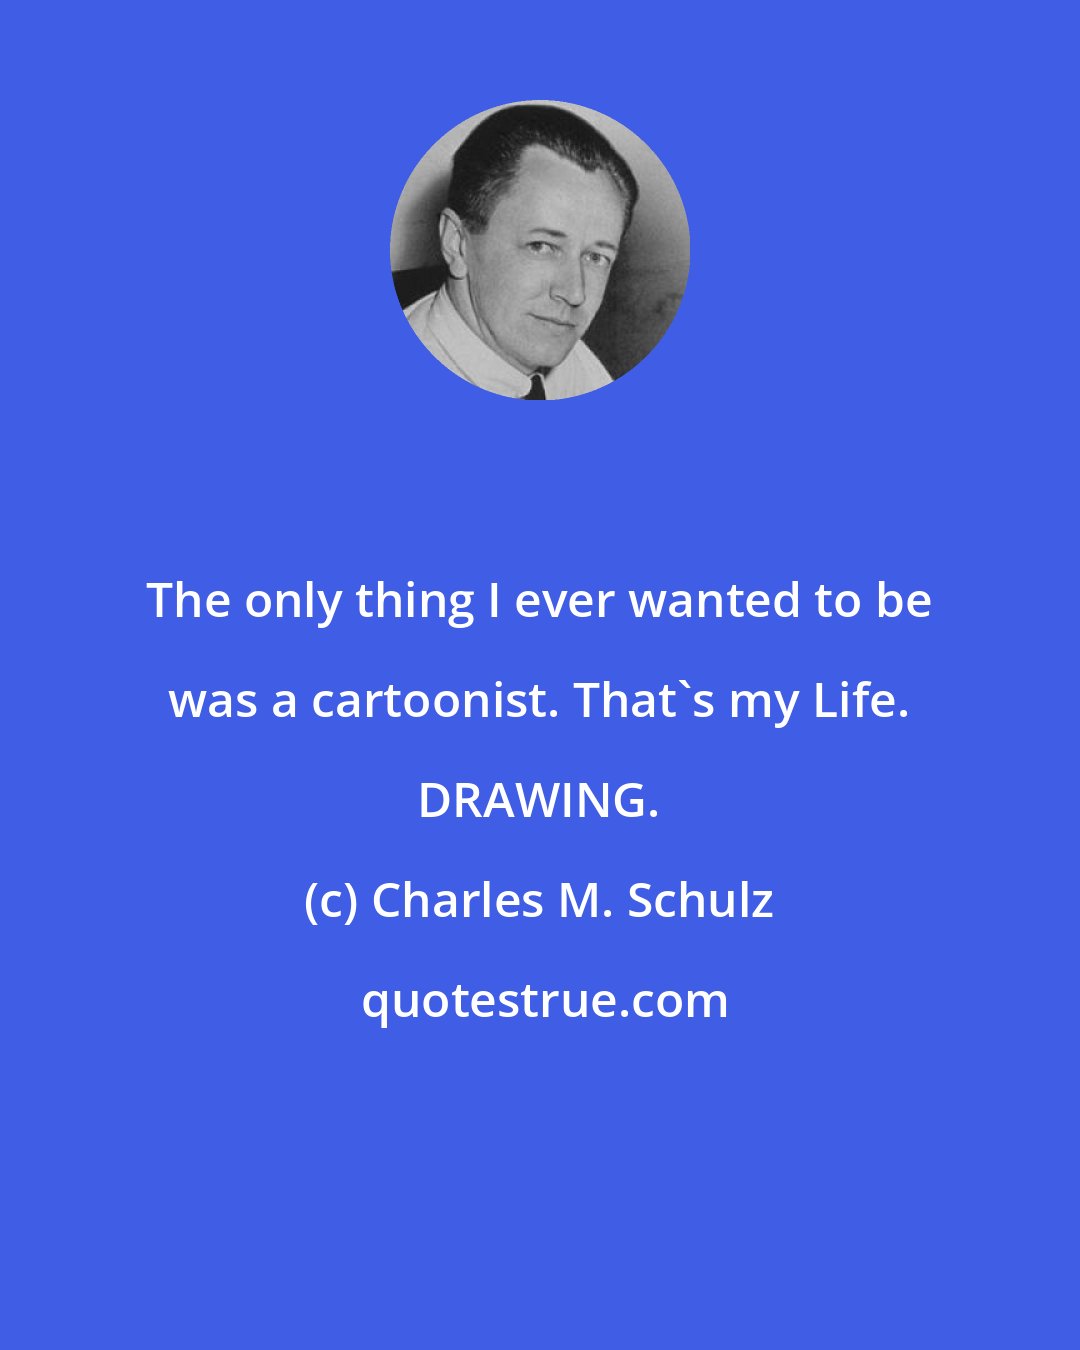 Charles M. Schulz: The only thing I ever wanted to be was a cartoonist. That's my Life. DRAWING.